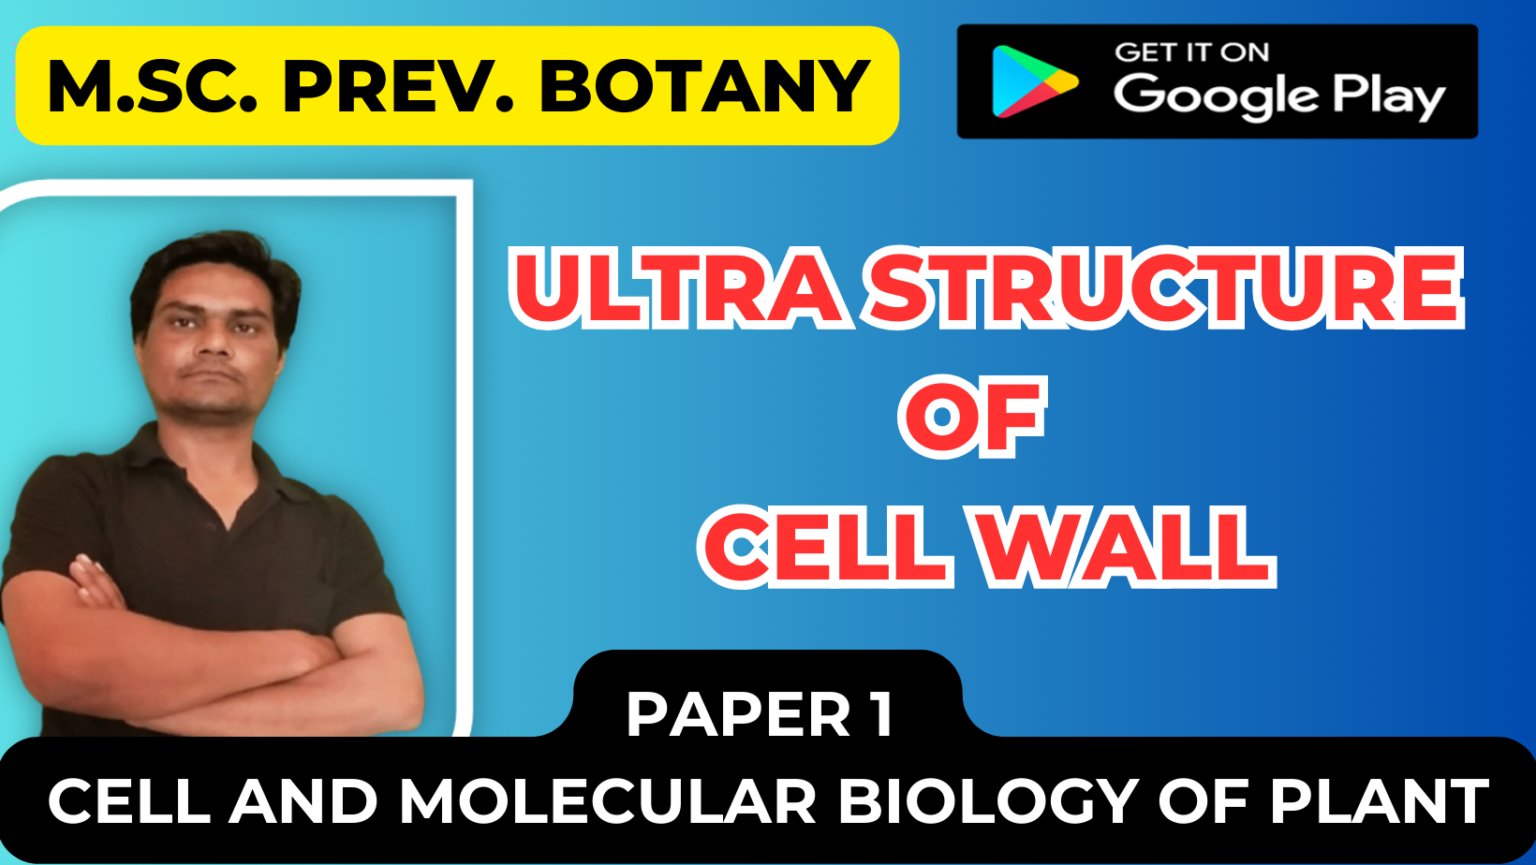 Ultra structure of cell wall